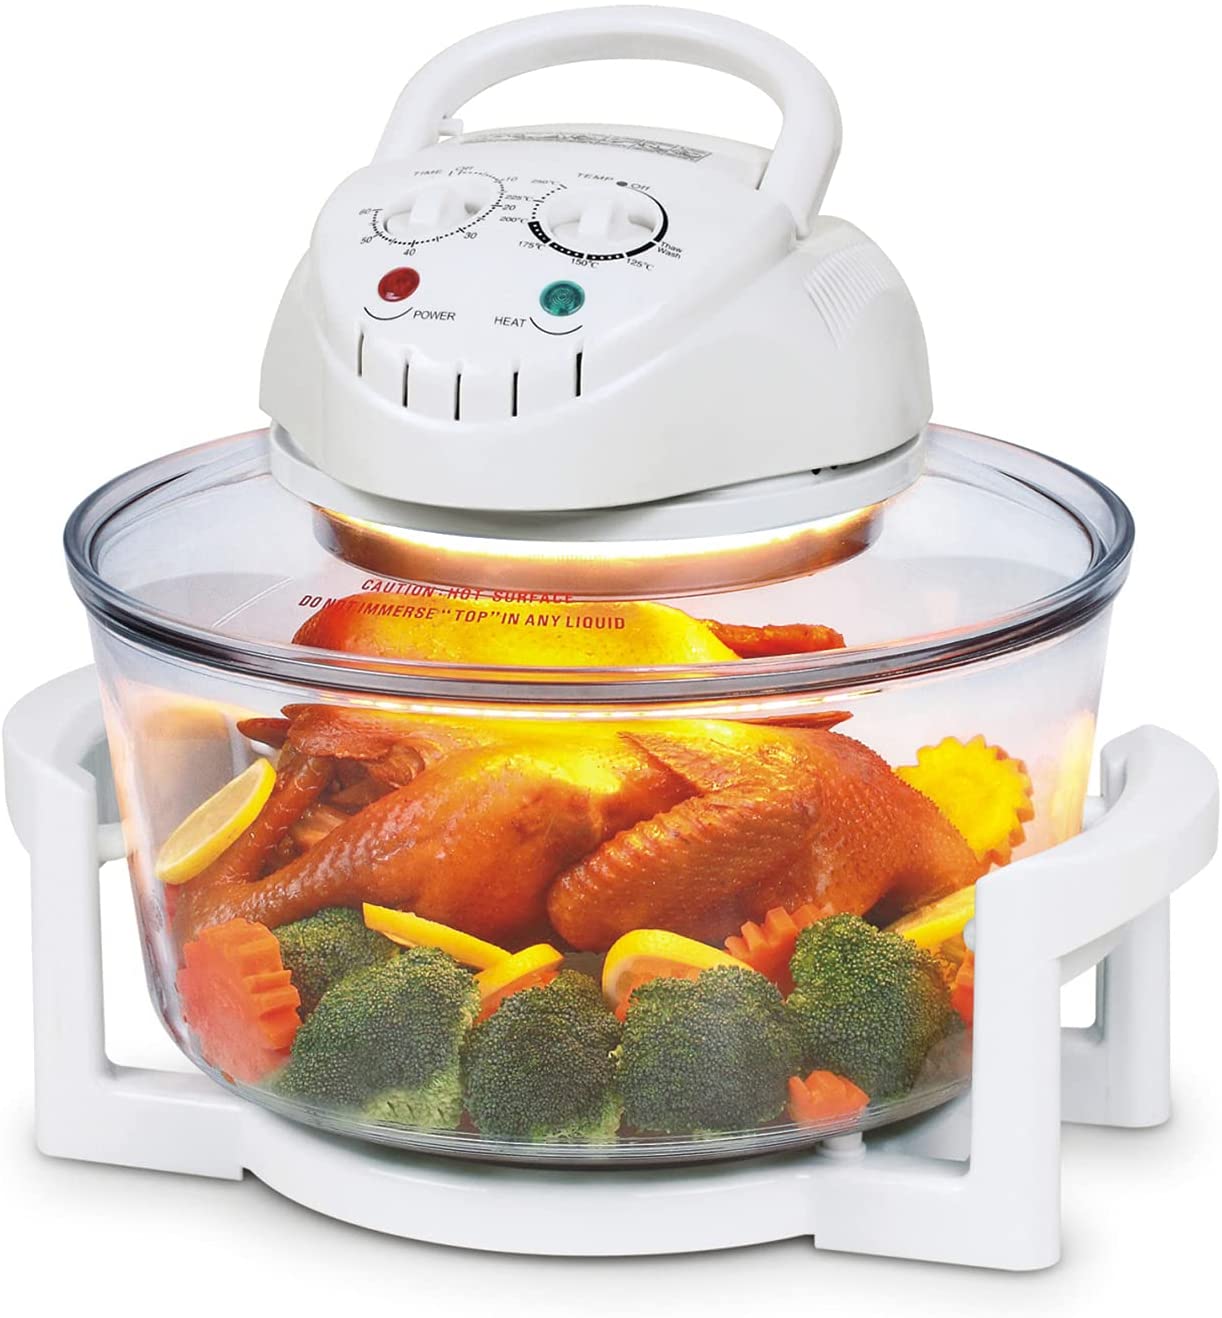 TZS First Austria 5030/1 Large 17 Litre Halogen Oven with Extender Ring Hot Air Oven Oven